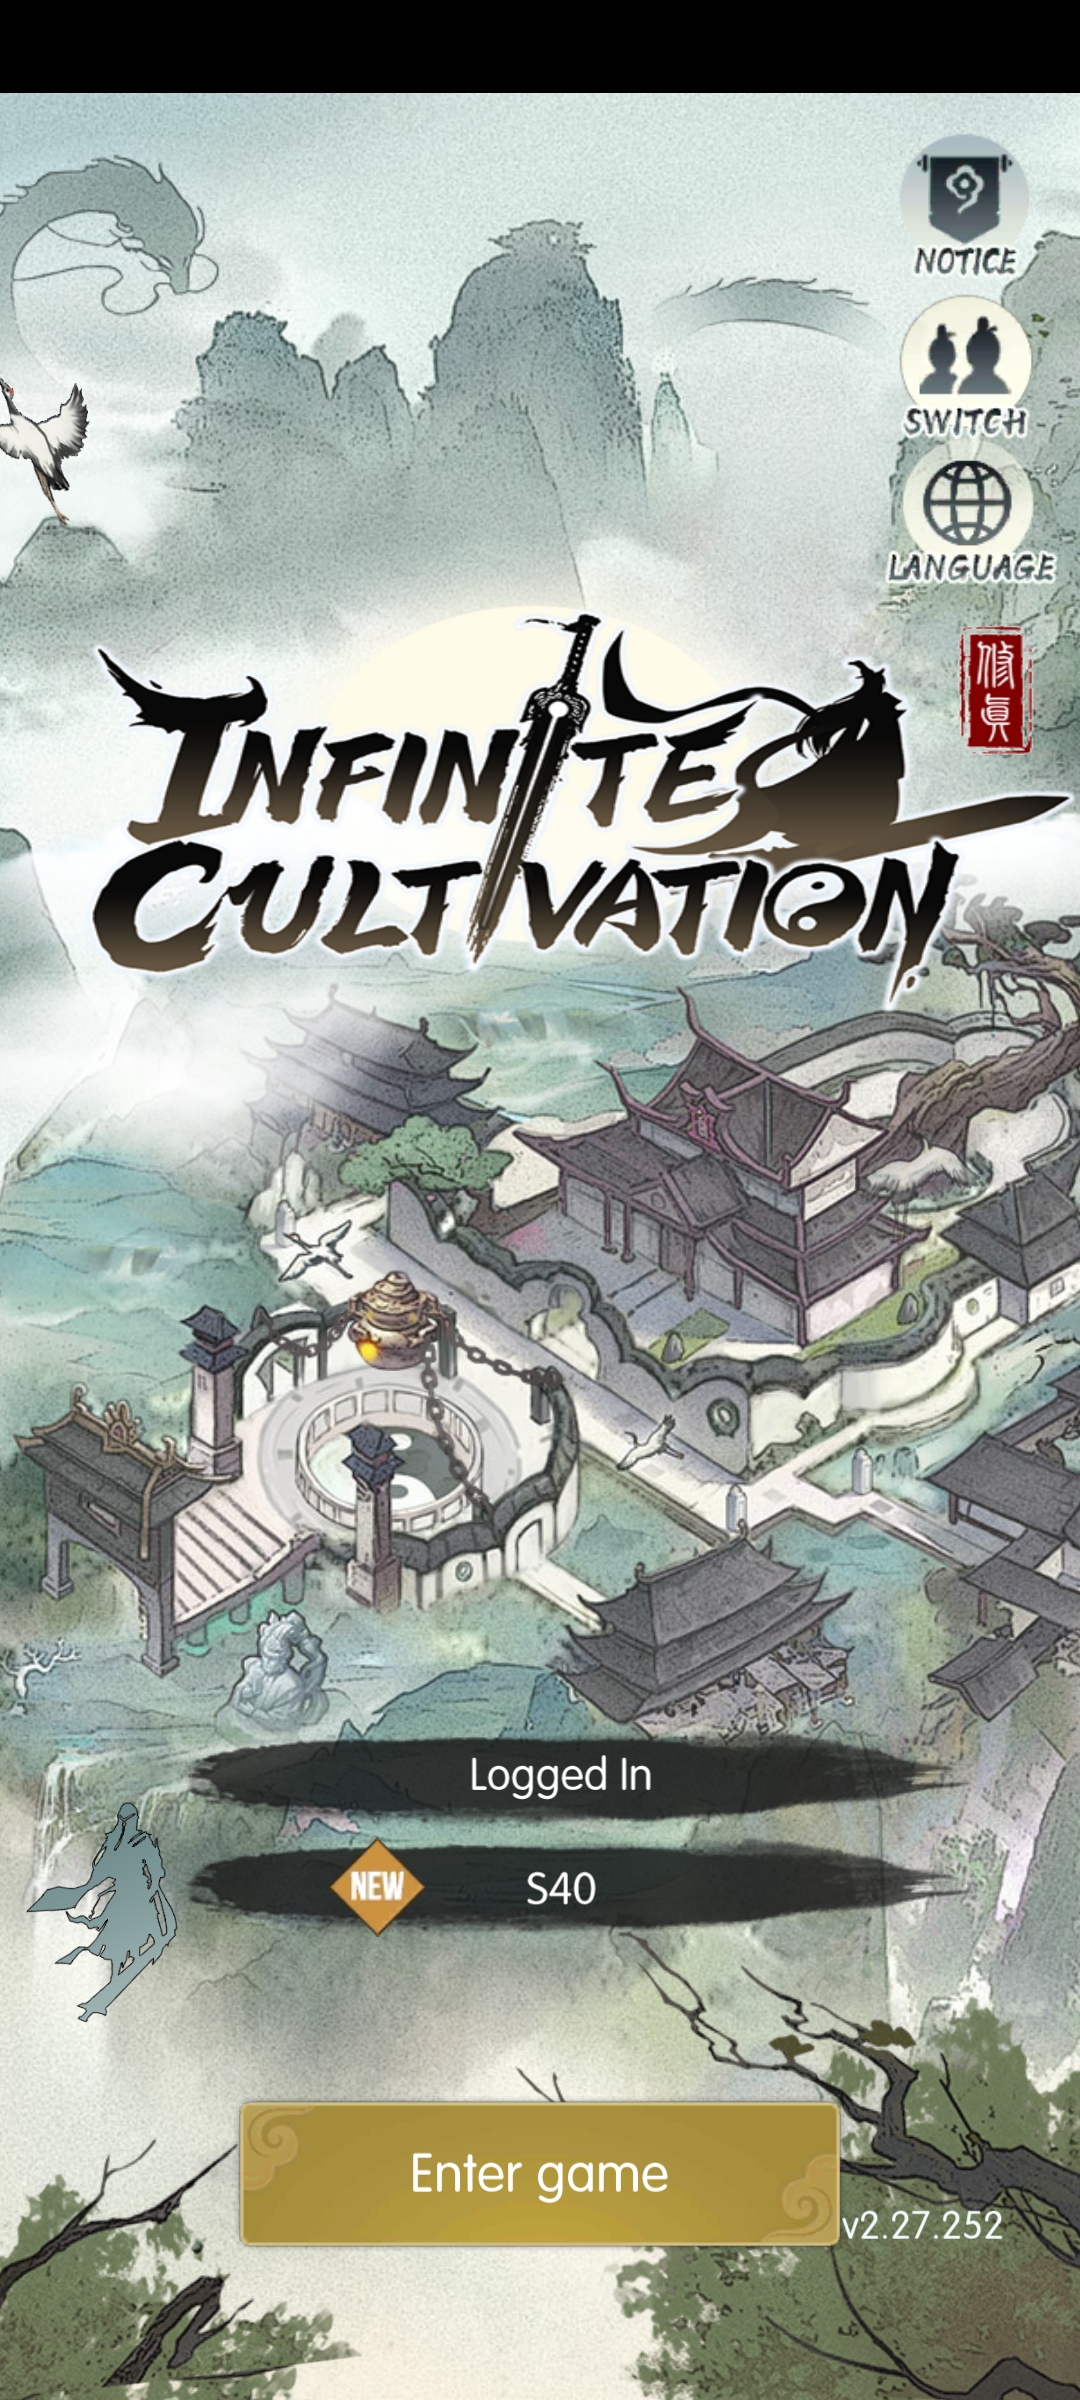 [Game Android] 無極仙途 (Infinite Cultivation)